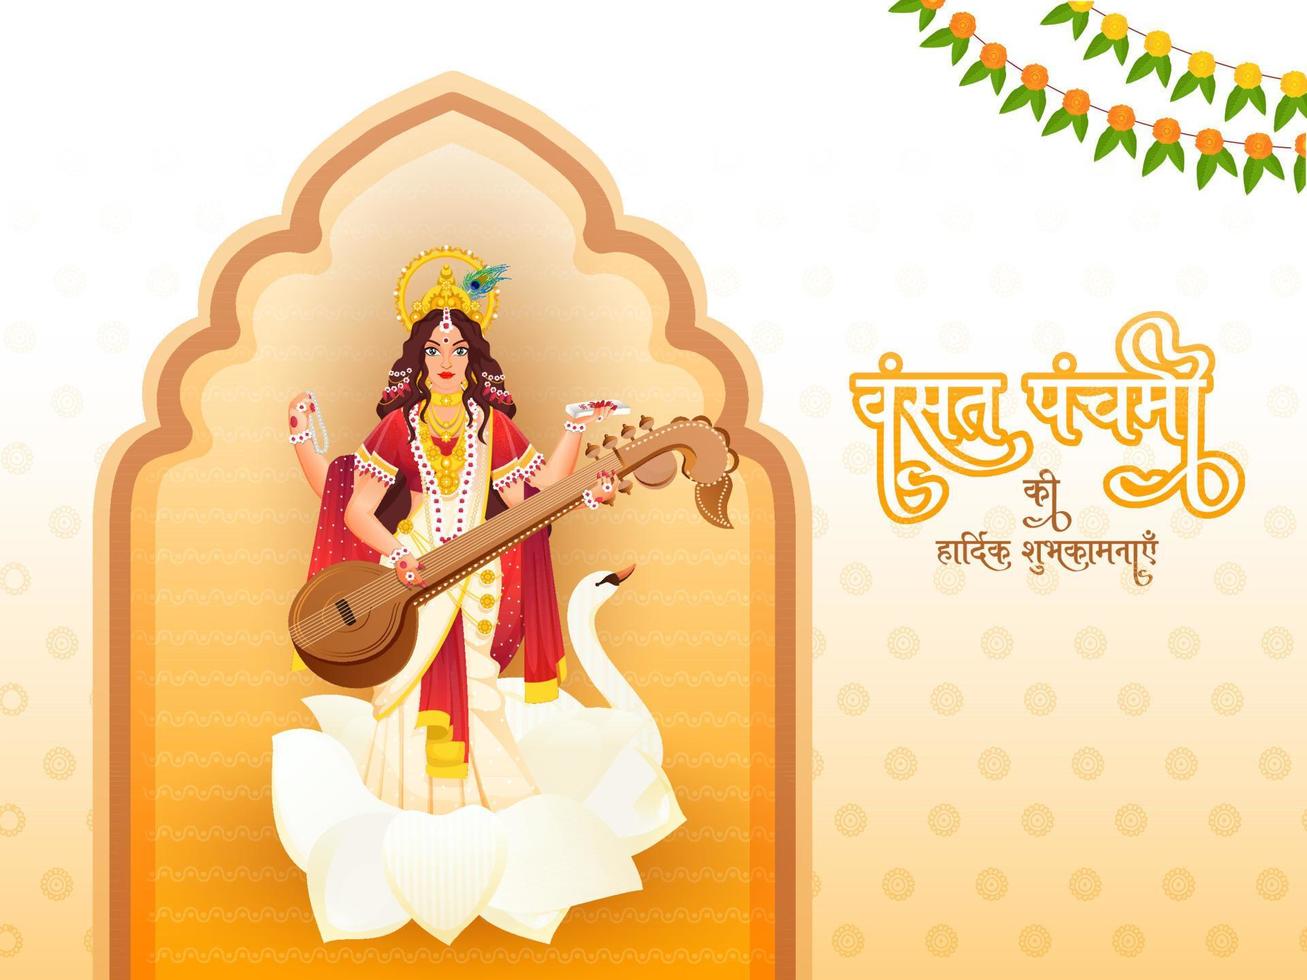 Best Wishes Of Vasant Panchami Hindi Text With Goddess Saraswati Sculpture On Orange And White Background. vector